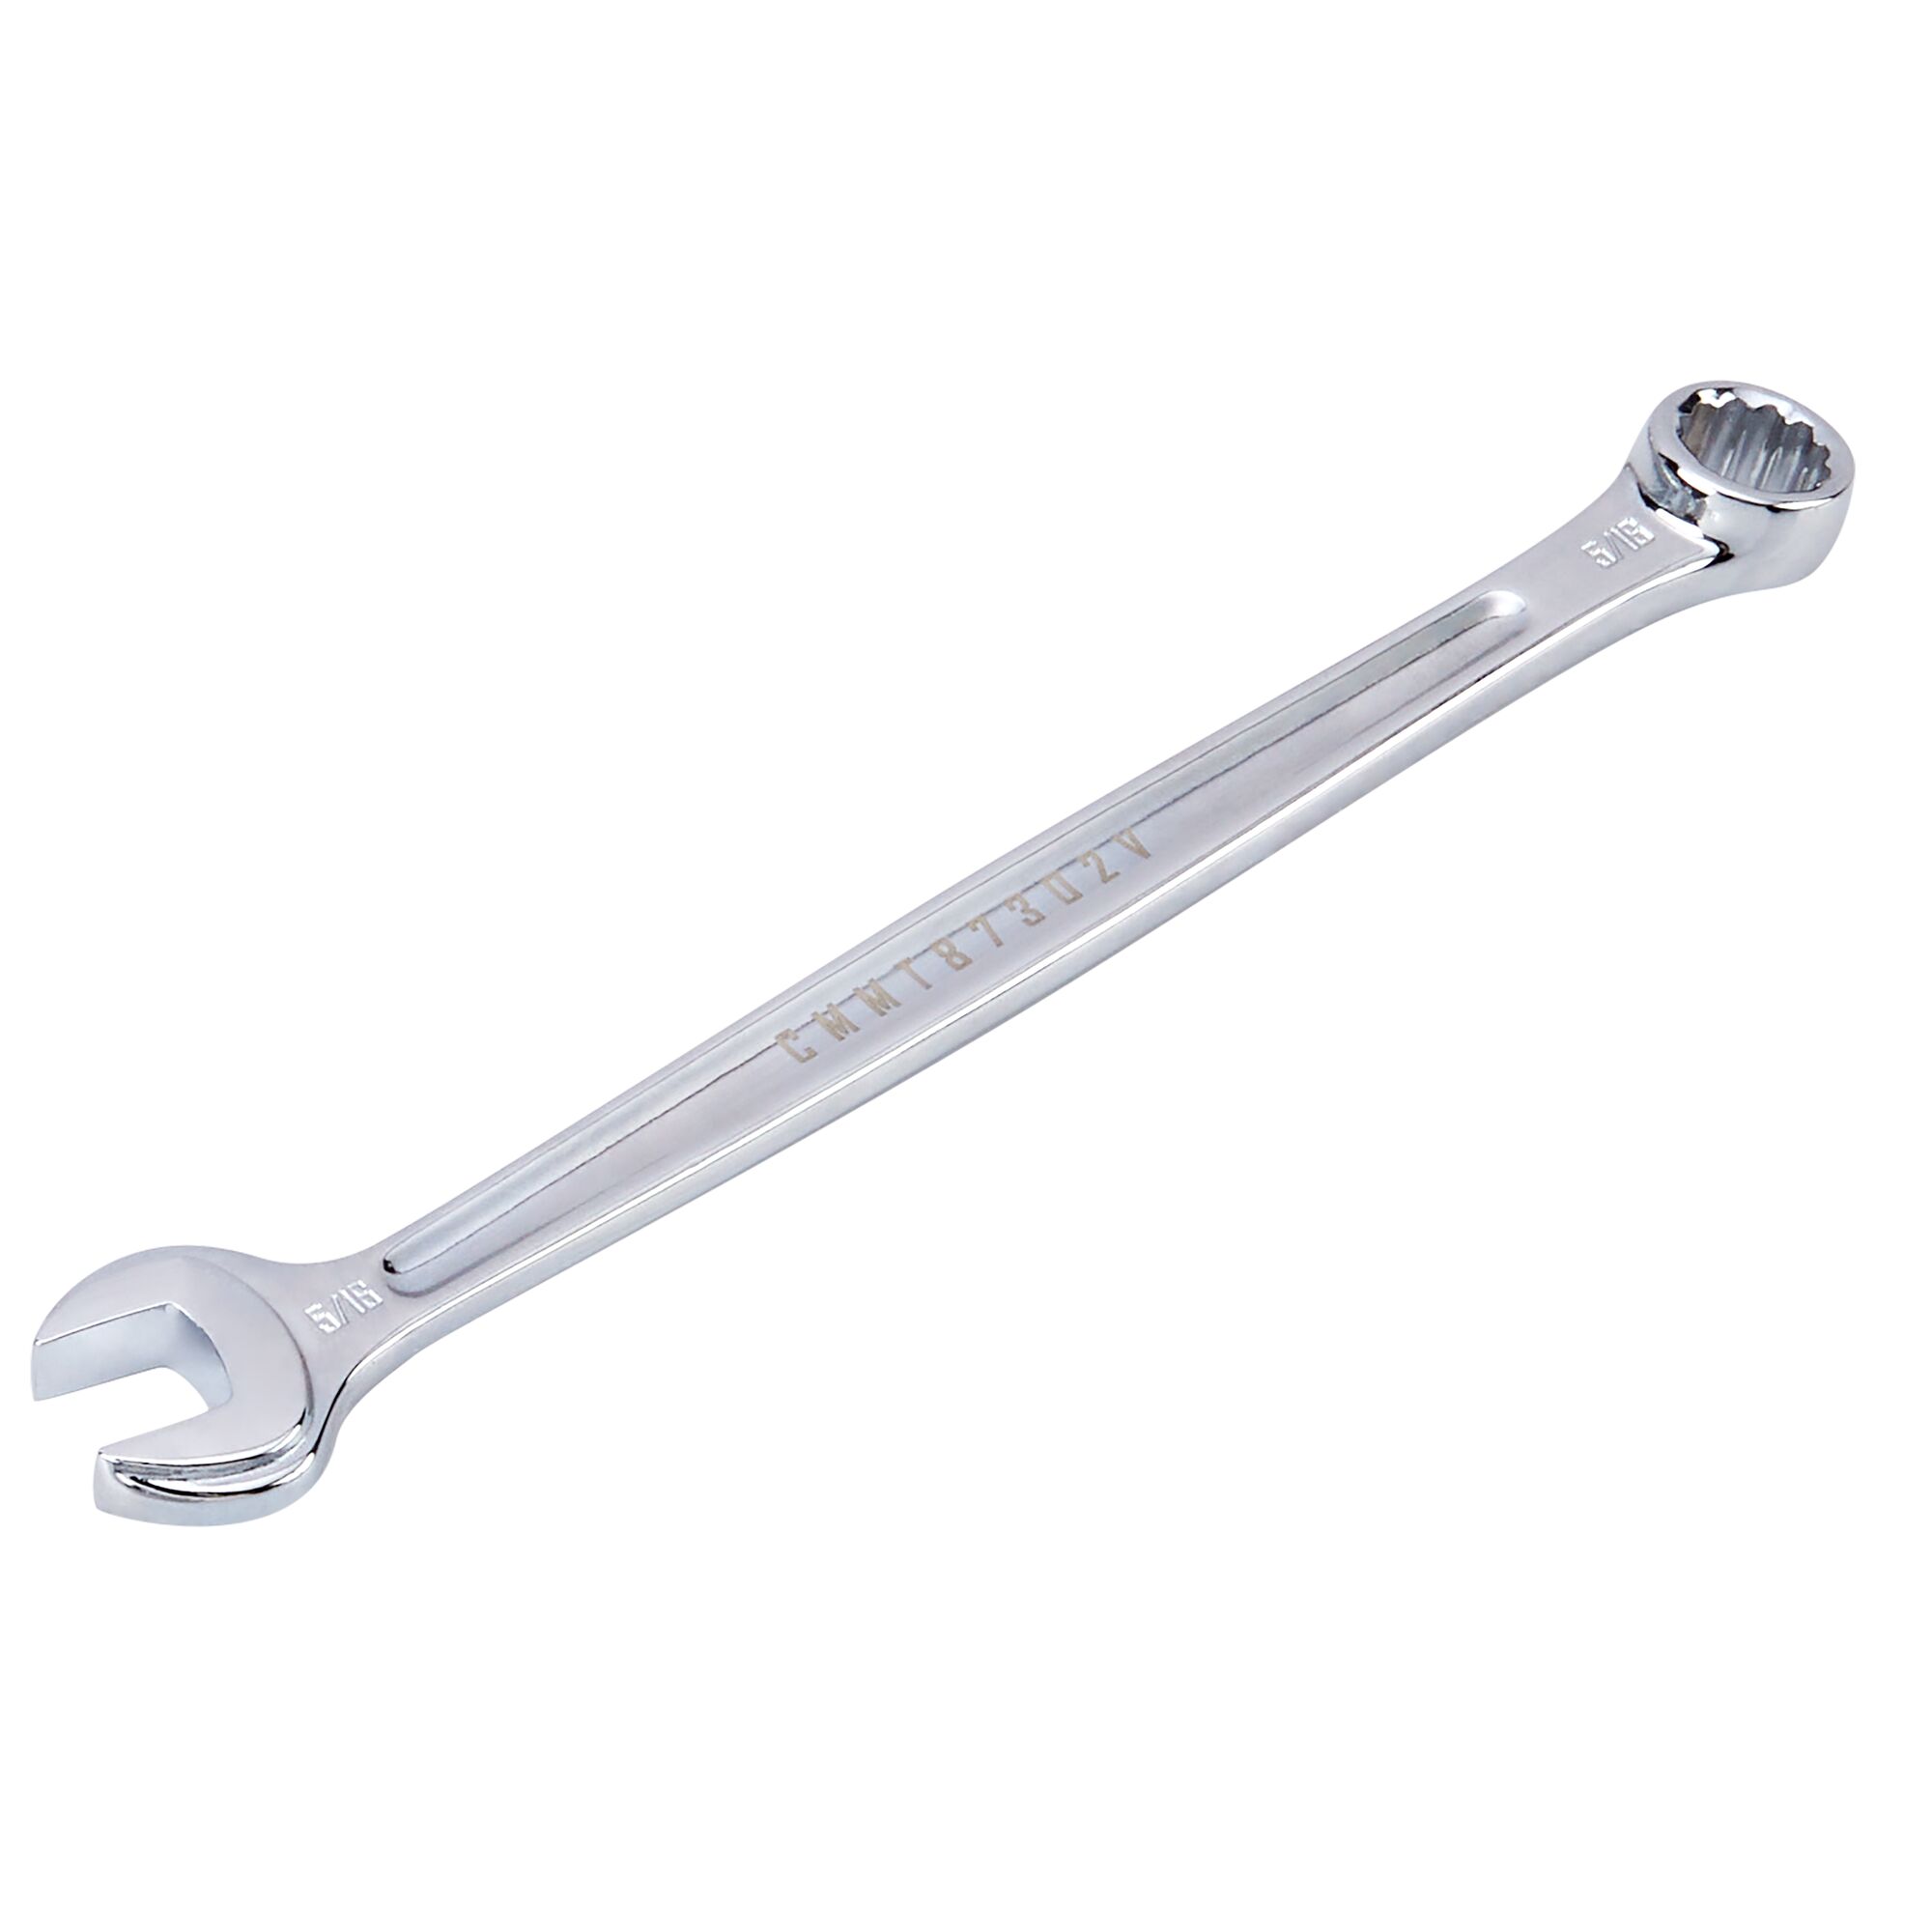 CRAFTSMAN V-SERIES Combo Wrench 5/16 